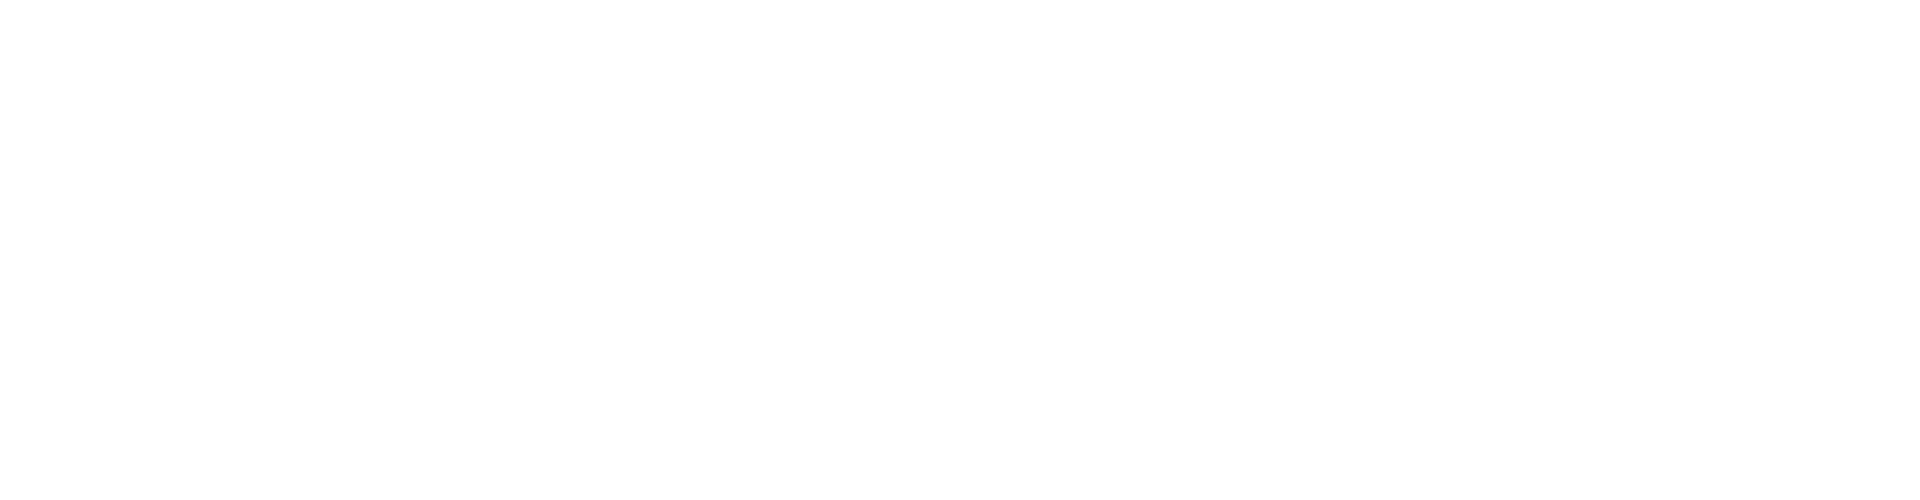 The Scuffed Series 22 - Rapid Guerrilla Busters